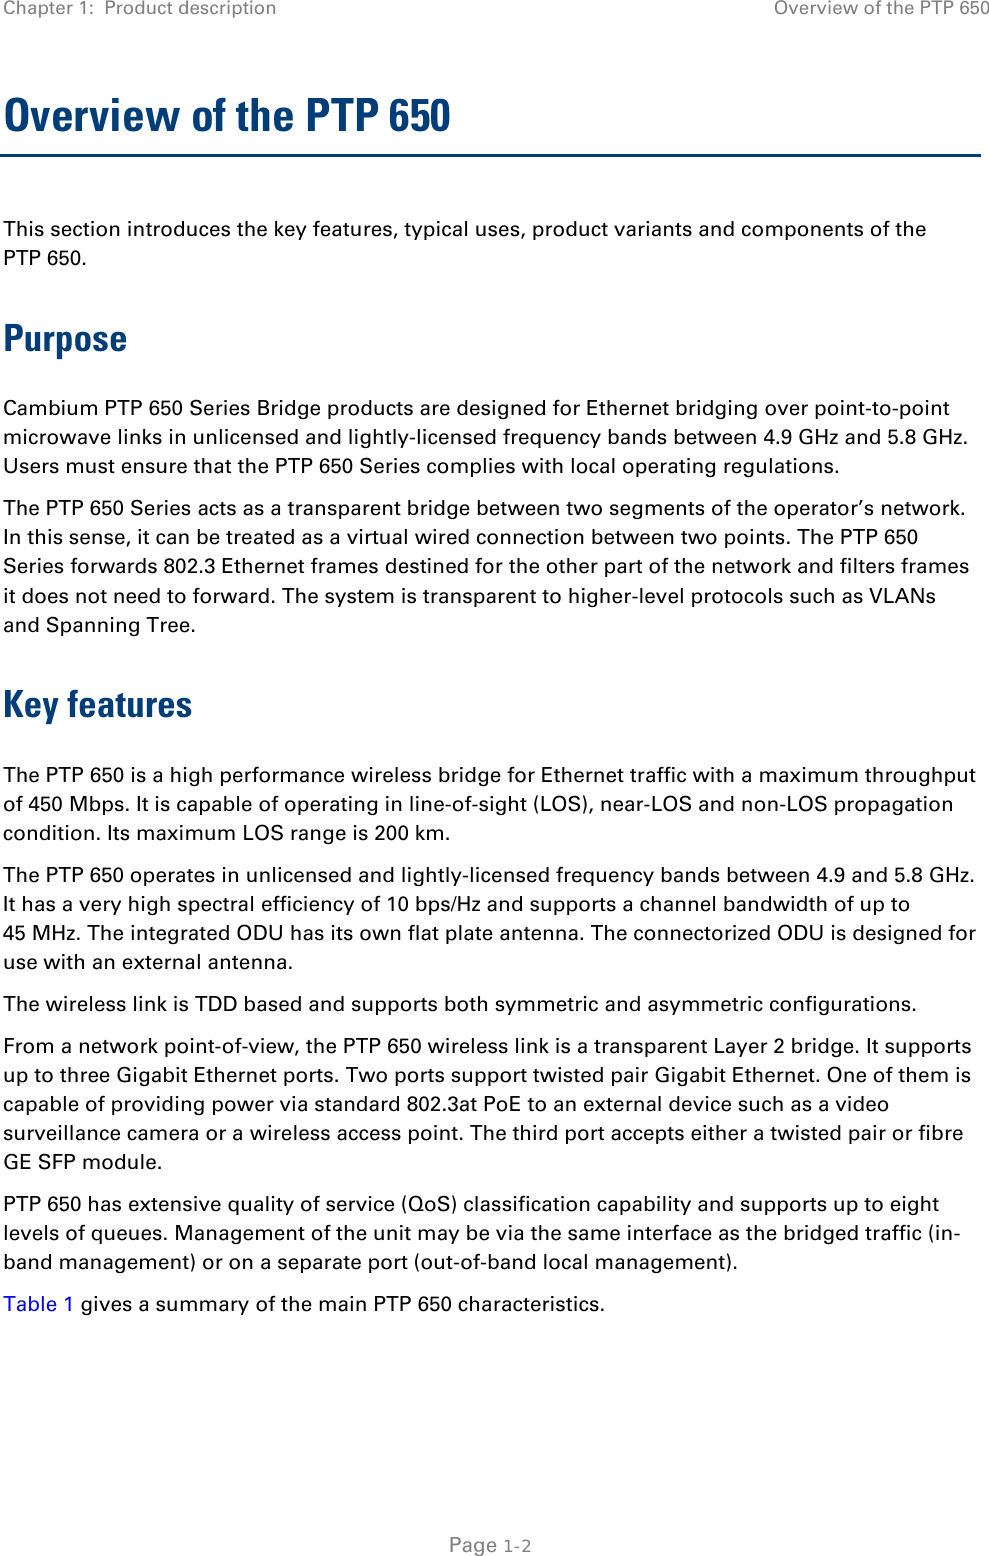 Chapter 1:  Product description Overview of the PTP 650  Overview of the PTP 650 This section introduces the key features, typical uses, product variants and components of the PTP 650. Purpose Cambium PTP 650 Series Bridge products are designed for Ethernet bridging over point-to-point microwave links in unlicensed and lightly-licensed frequency bands between 4.9 GHz and 5.8 GHz. Users must ensure that the PTP 650 Series complies with local operating regulations. The PTP 650 Series acts as a transparent bridge between two segments of the operator’s network. In this sense, it can be treated as a virtual wired connection between two points. The PTP 650 Series forwards 802.3 Ethernet frames destined for the other part of the network and filters frames it does not need to forward. The system is transparent to higher-level protocols such as VLANs and Spanning Tree. Key features The PTP 650 is a high performance wireless bridge for Ethernet traffic with a maximum throughput of 450 Mbps. It is capable of operating in line-of-sight (LOS), near-LOS and non-LOS propagation condition. Its maximum LOS range is 200 km. The PTP 650 operates in unlicensed and lightly-licensed frequency bands between 4.9 and 5.8 GHz. It has a very high spectral efficiency of 10 bps/Hz and supports a channel bandwidth of up to 45 MHz. The integrated ODU has its own flat plate antenna. The connectorized ODU is designed for use with an external antenna. The wireless link is TDD based and supports both symmetric and asymmetric configurations. From a network point-of-view, the PTP 650 wireless link is a transparent Layer 2 bridge. It supports up to three Gigabit Ethernet ports. Two ports support twisted pair Gigabit Ethernet. One of them is capable of providing power via standard 802.3at PoE to an external device such as a video surveillance camera or a wireless access point. The third port accepts either a twisted pair or fibre GE SFP module. PTP 650 has extensive quality of service (QoS) classification capability and supports up to eight levels of queues. Management of the unit may be via the same interface as the bridged traffic (in-band management) or on a separate port (out-of-band local management). Table 1 gives a summary of the main PTP 650 characteristics.   Page 1-2 